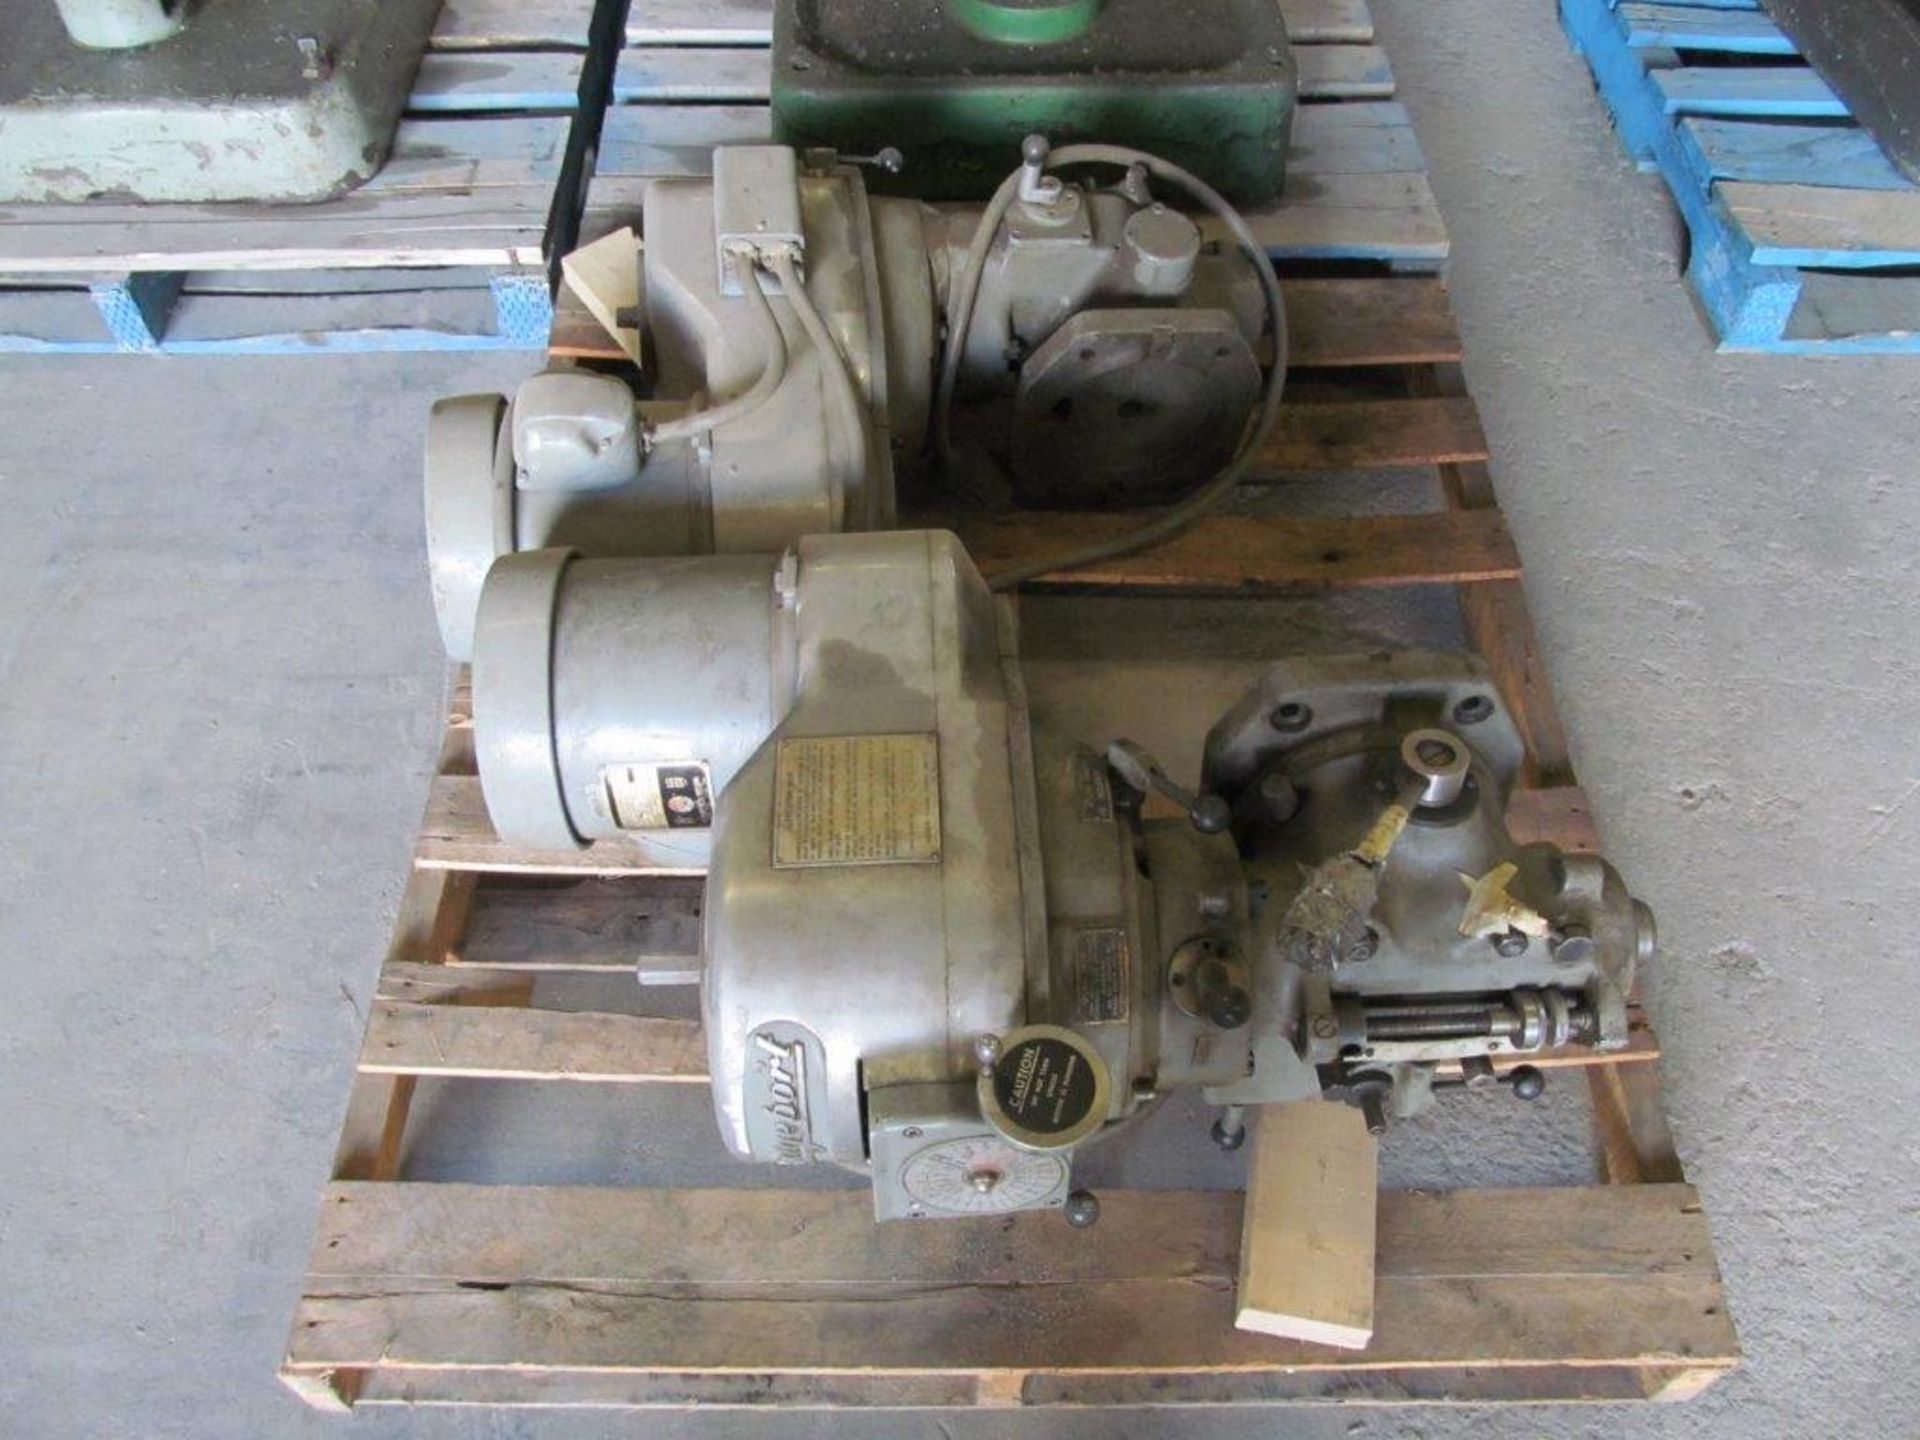 LOT CONSISTING OF (3) TURRET MILLS & (2) VARIABLE SPEED MILLING HEADS, SOLD AS (1) LOT - Image 7 of 9